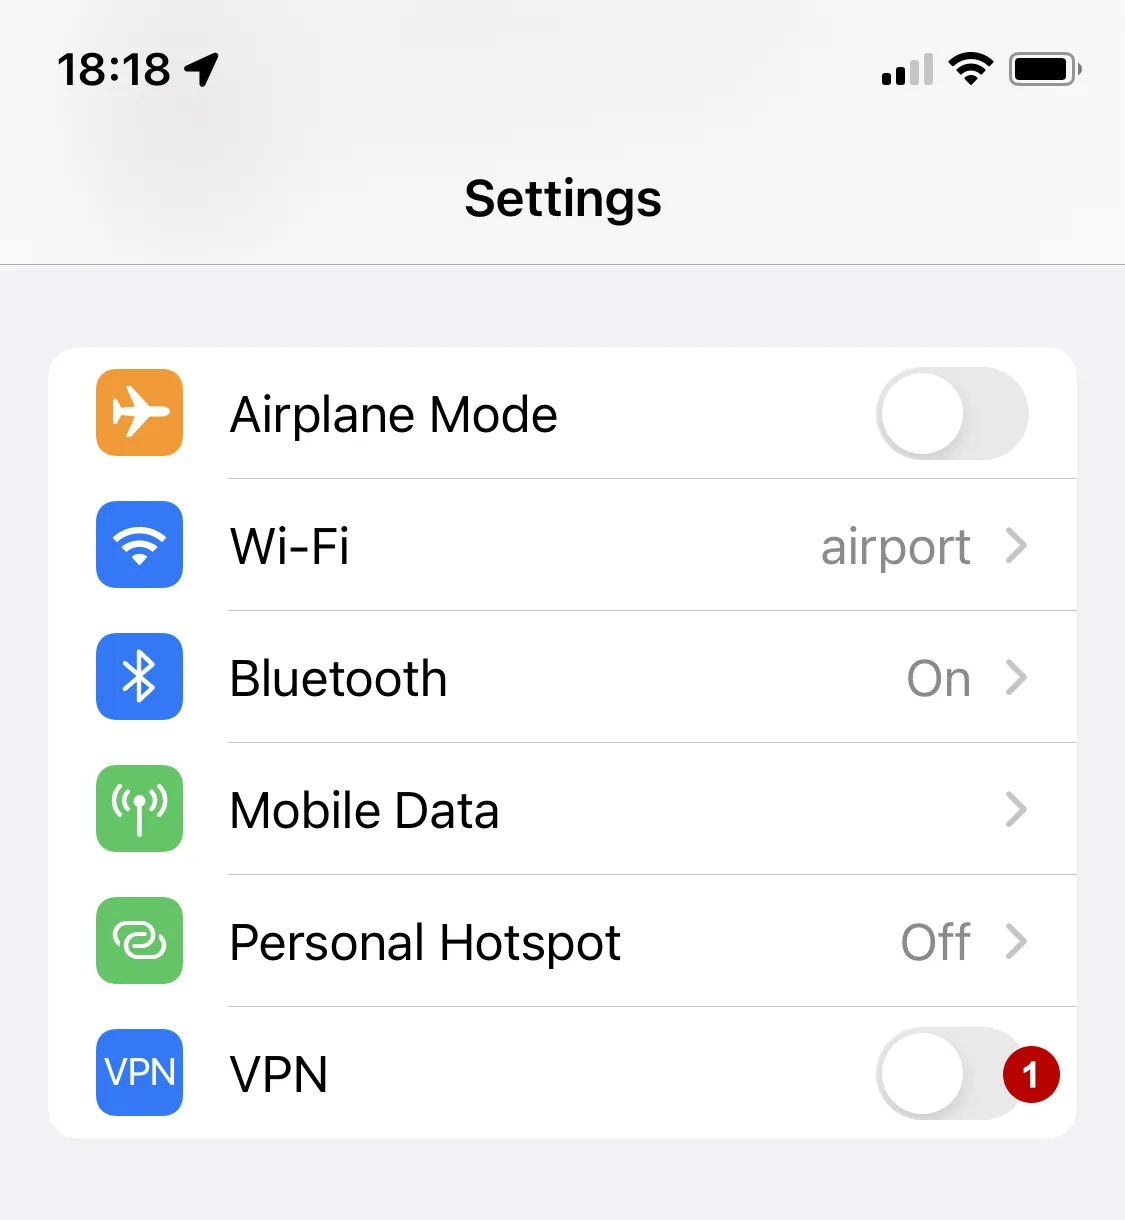 Connection to IKEv2 VPN via the Settings section on iOS 15